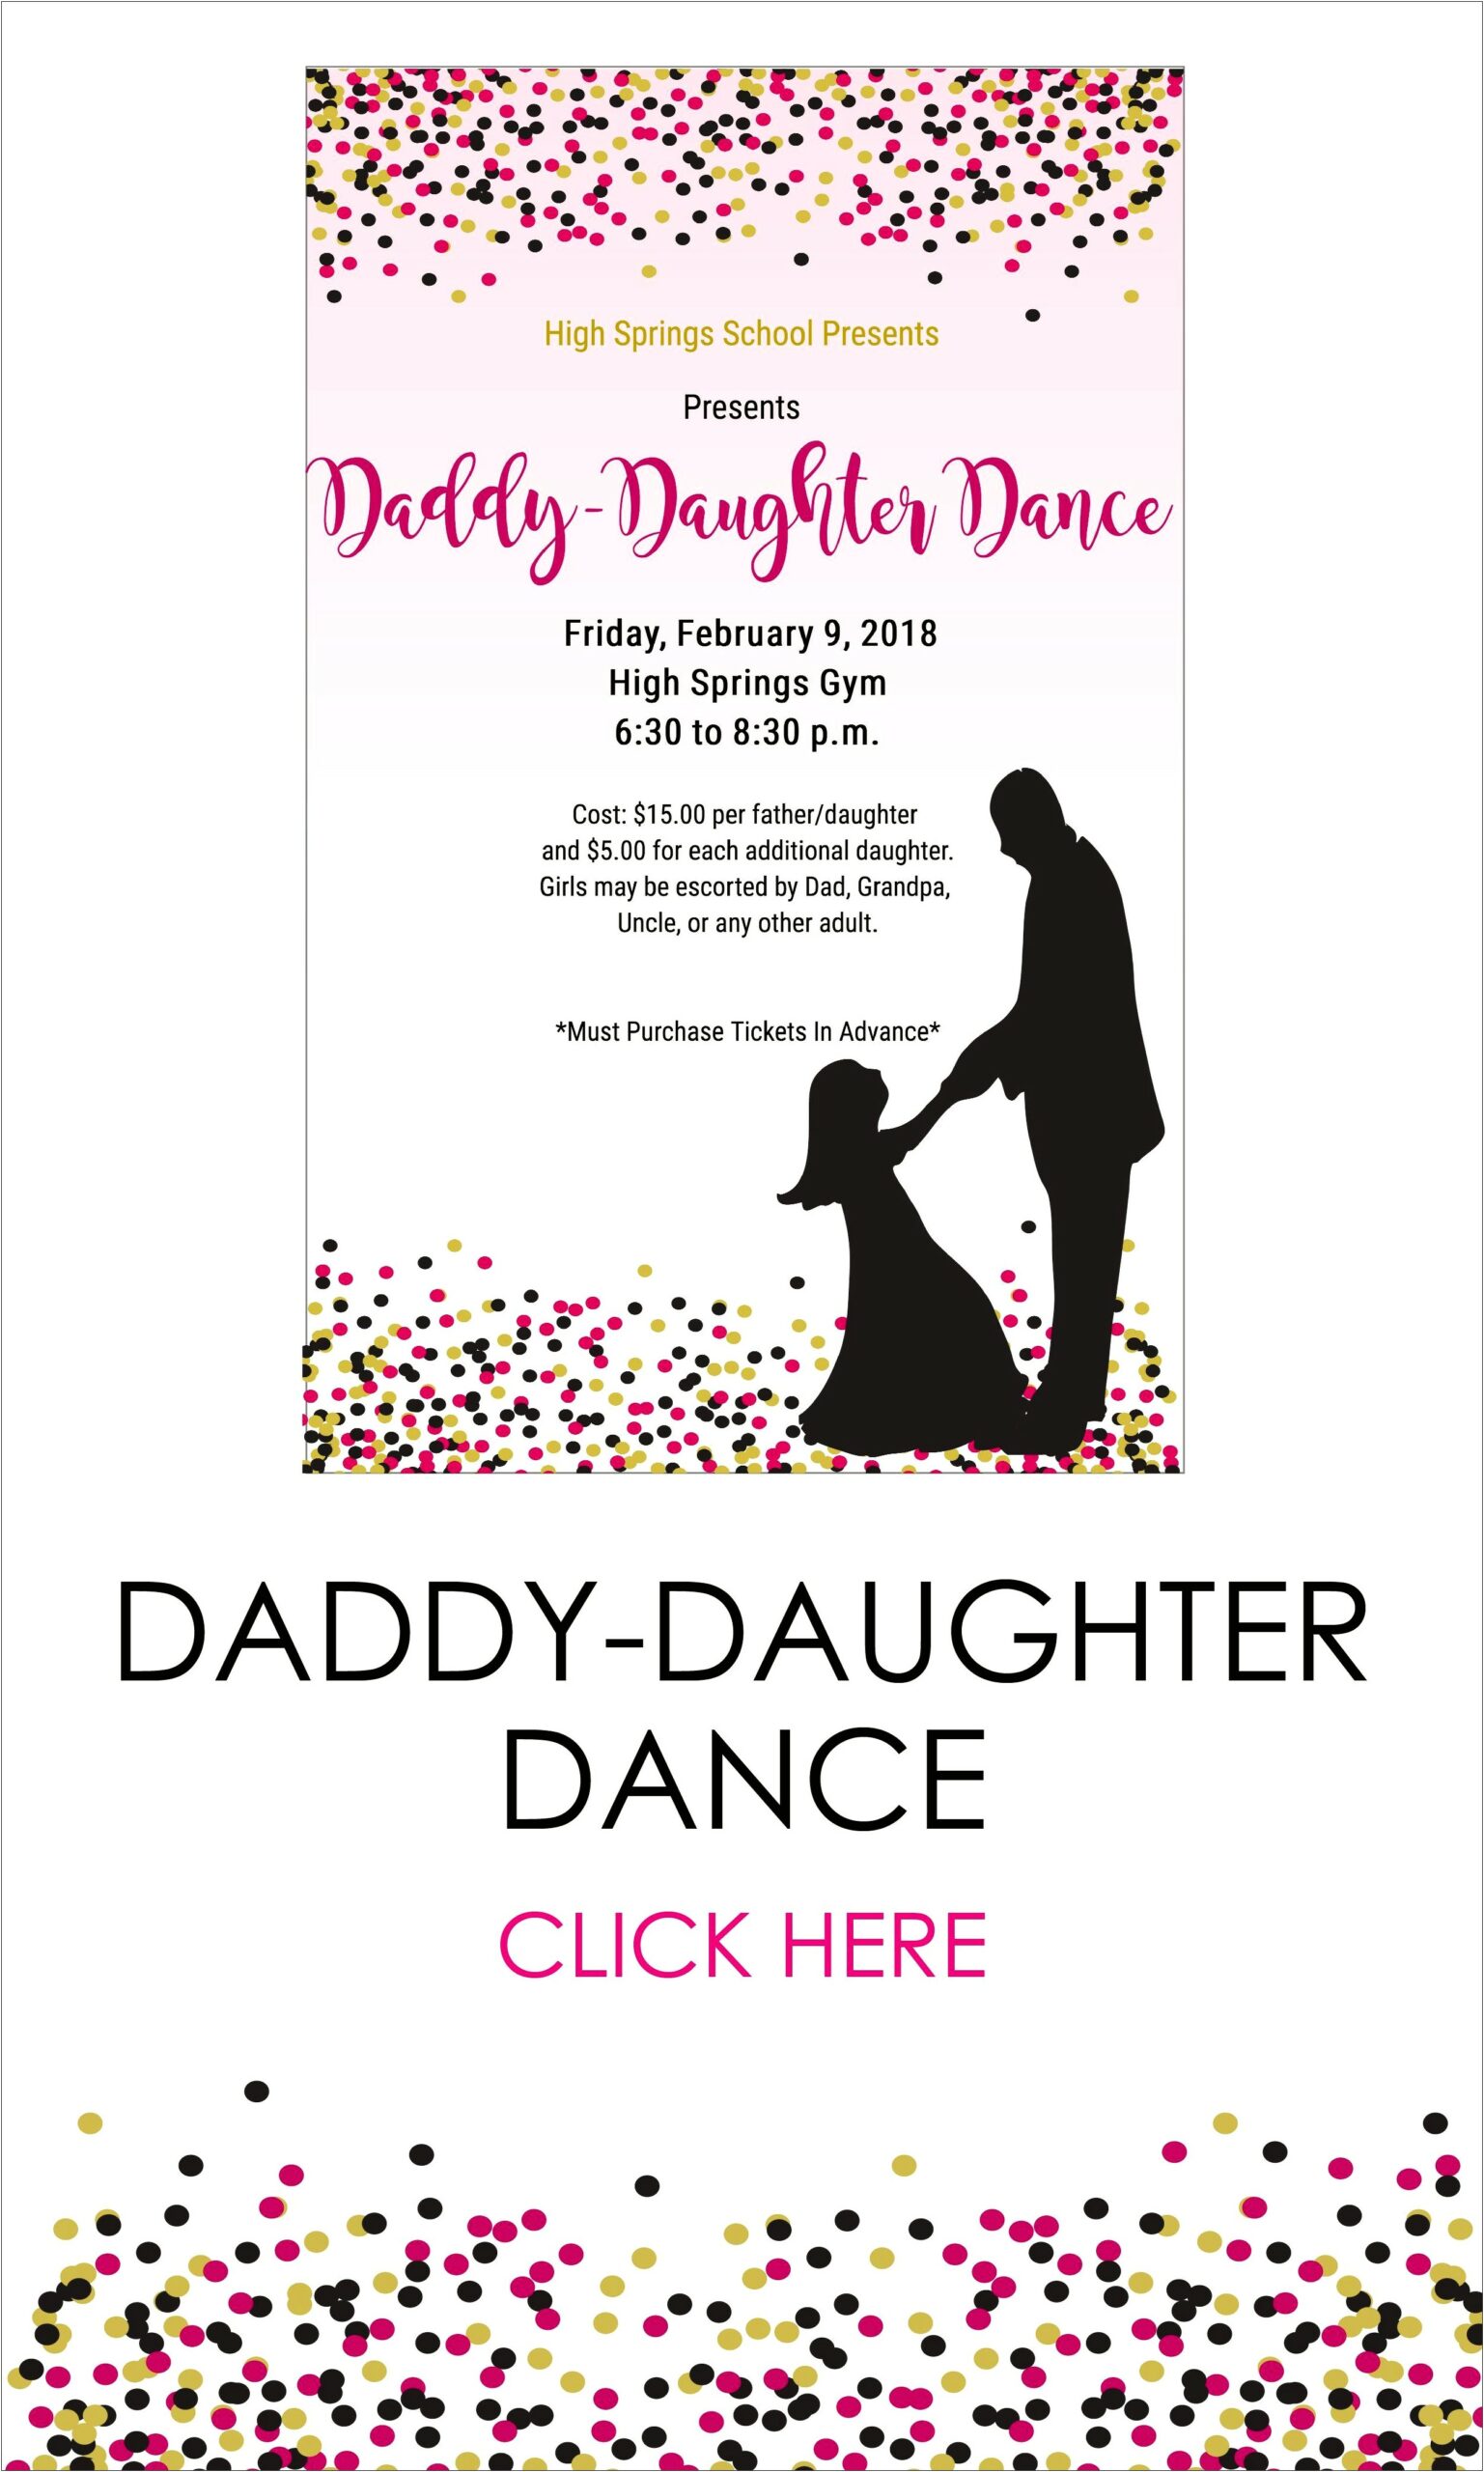 Free Father Daughter Dance Flyer Templates